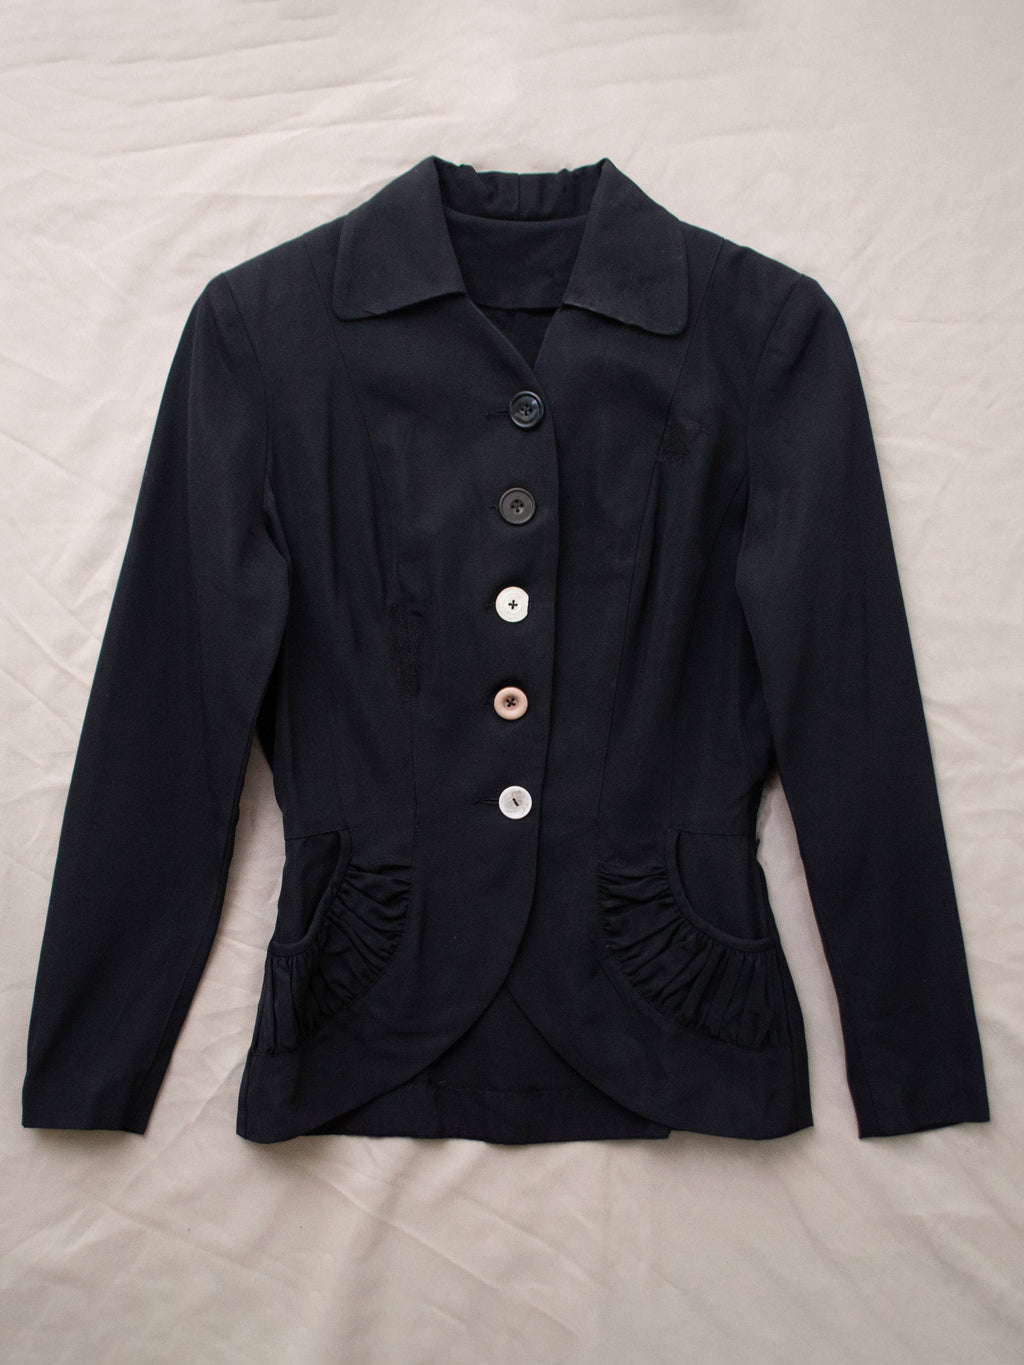 Repaired 1940s Paul Sachs Black Jacket (F's US 6)